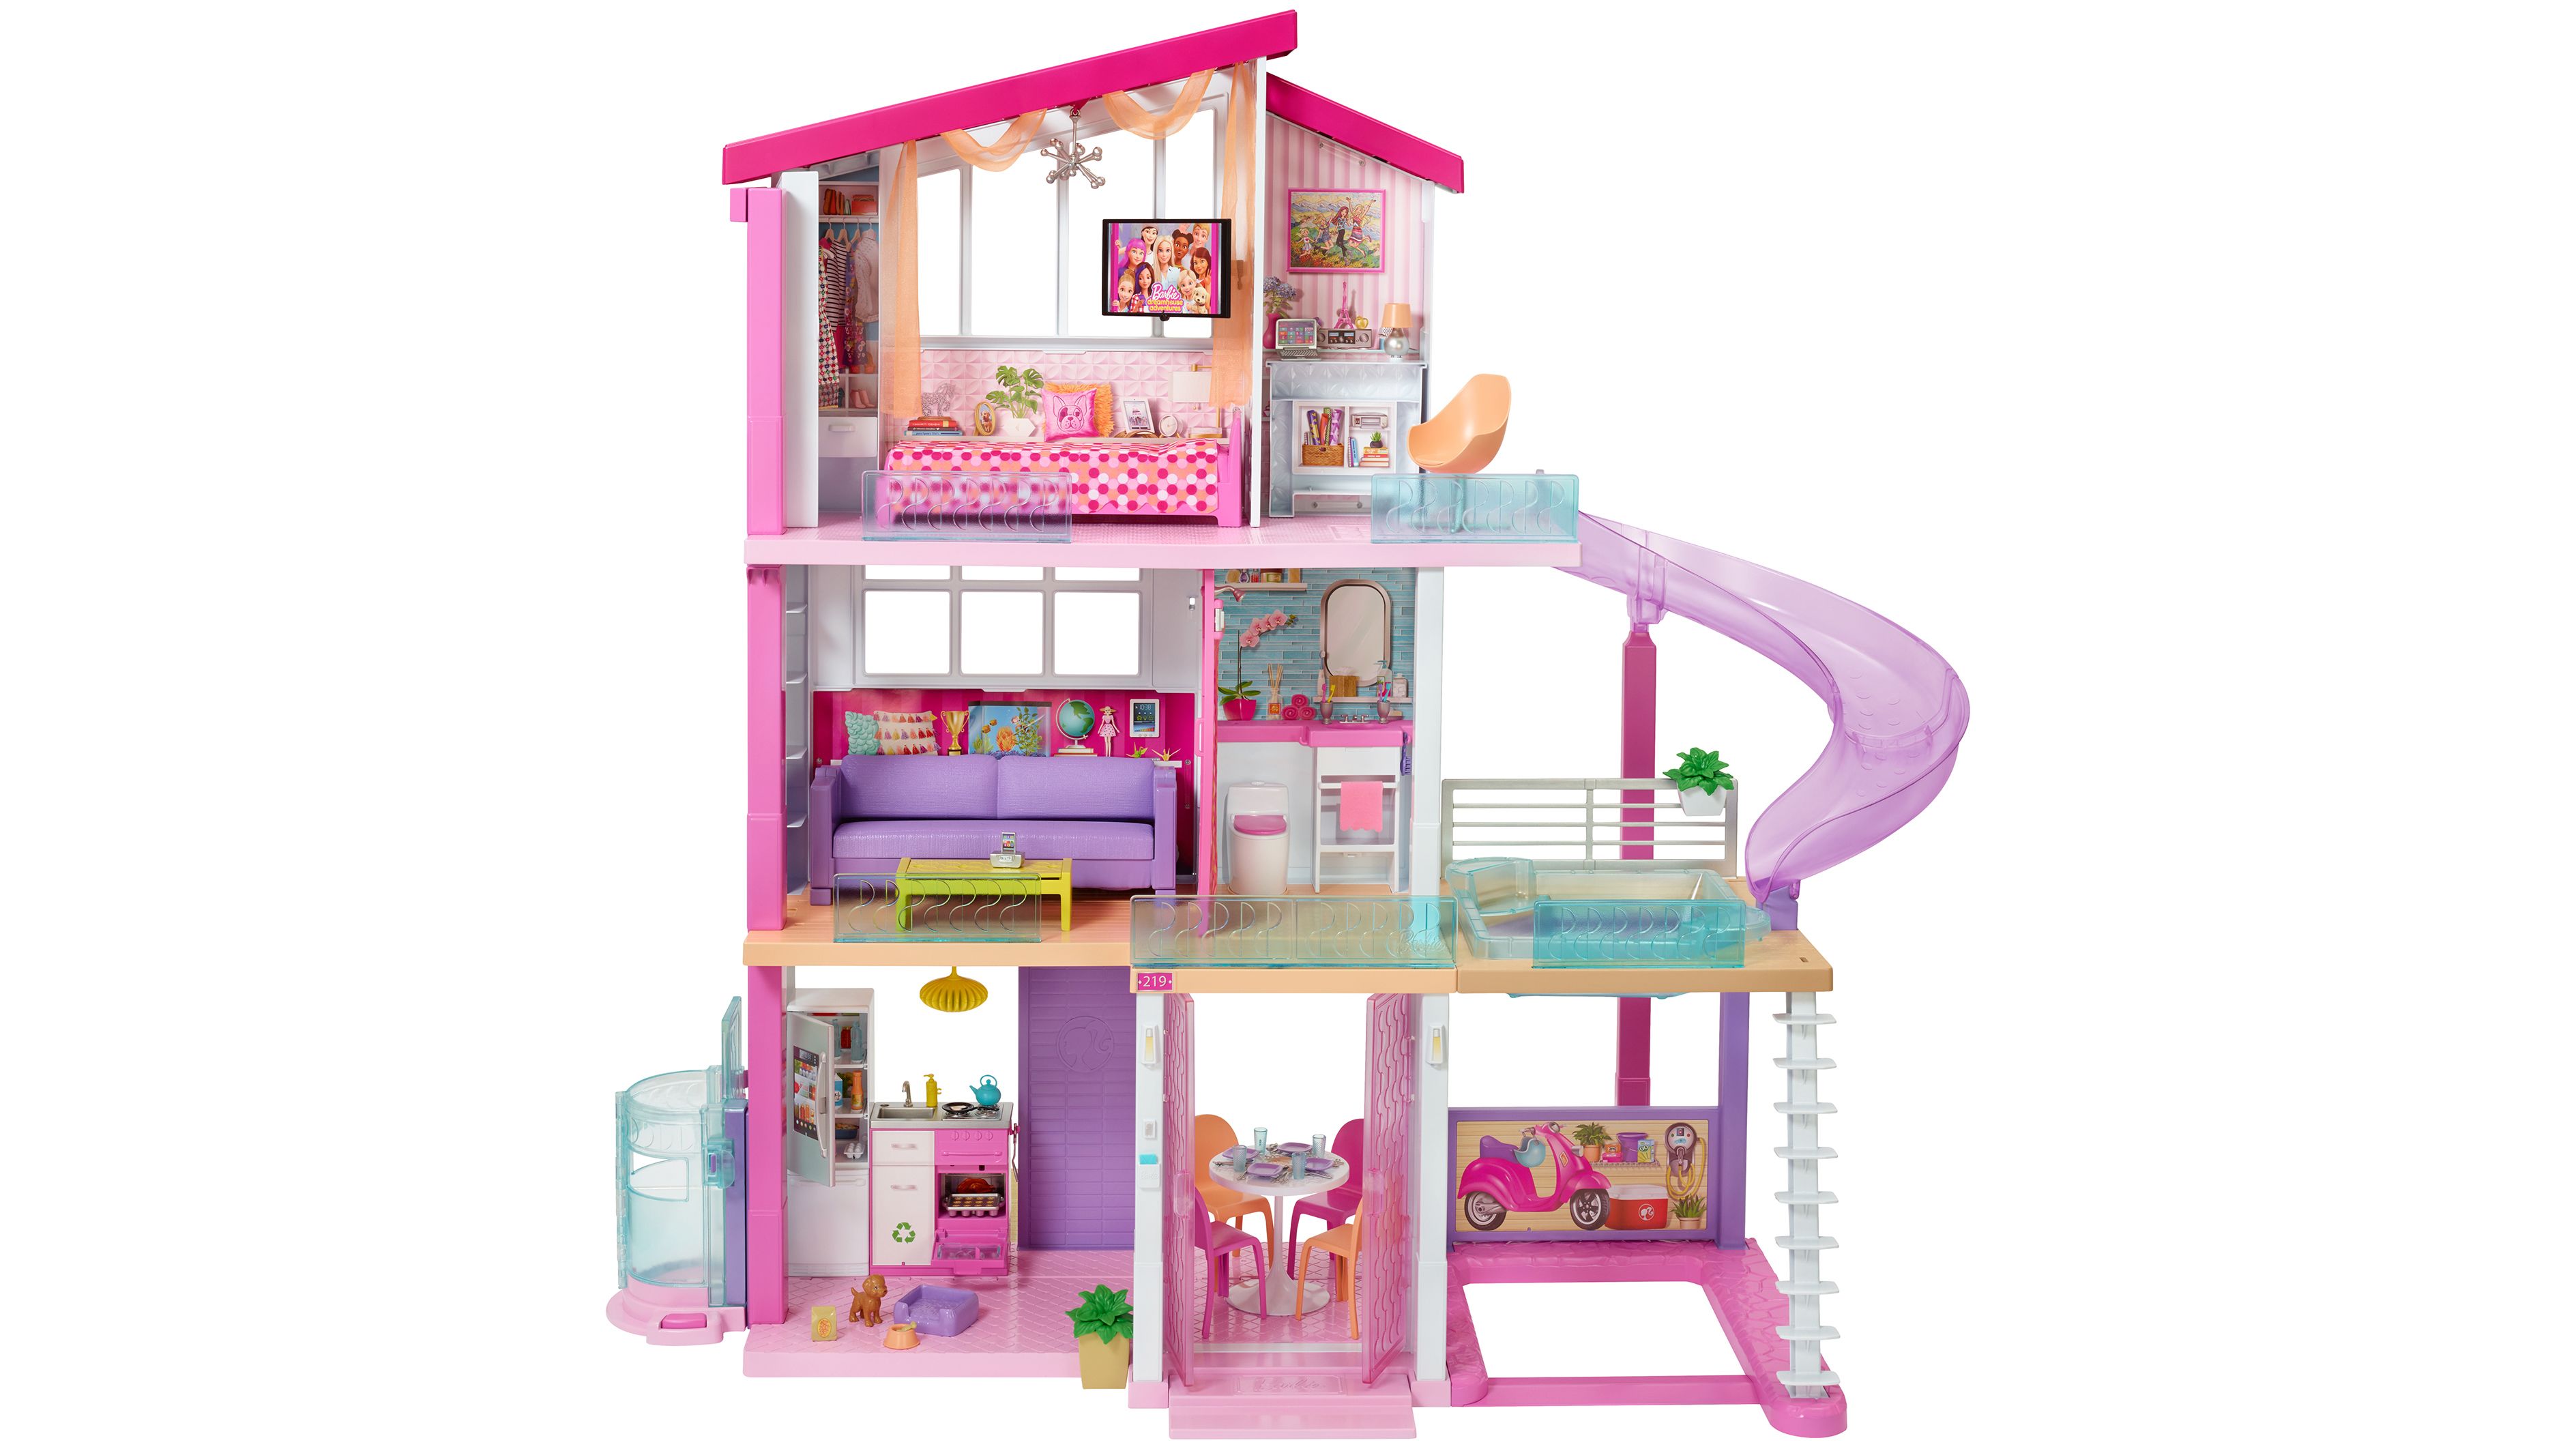 You Can Now Rent the Real Barbie Malibu DreamHouse Through Airbnb